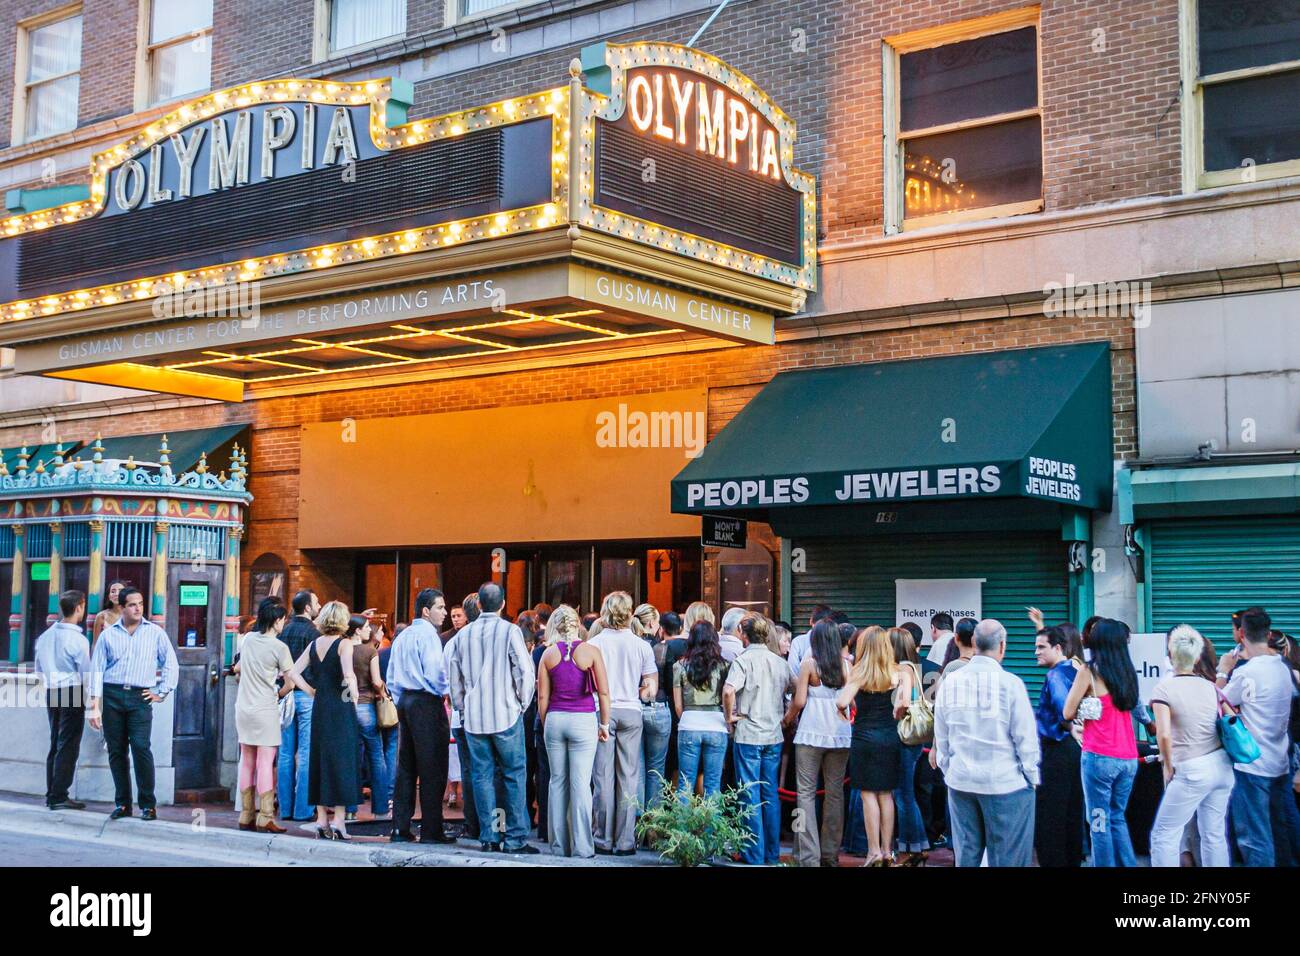 Miami Florida,Flagler Street Gusman Center for Performing Arts,Gen Art fashion show,entrance crowd line queue Olympia theater theatre marquee, Stock Photo